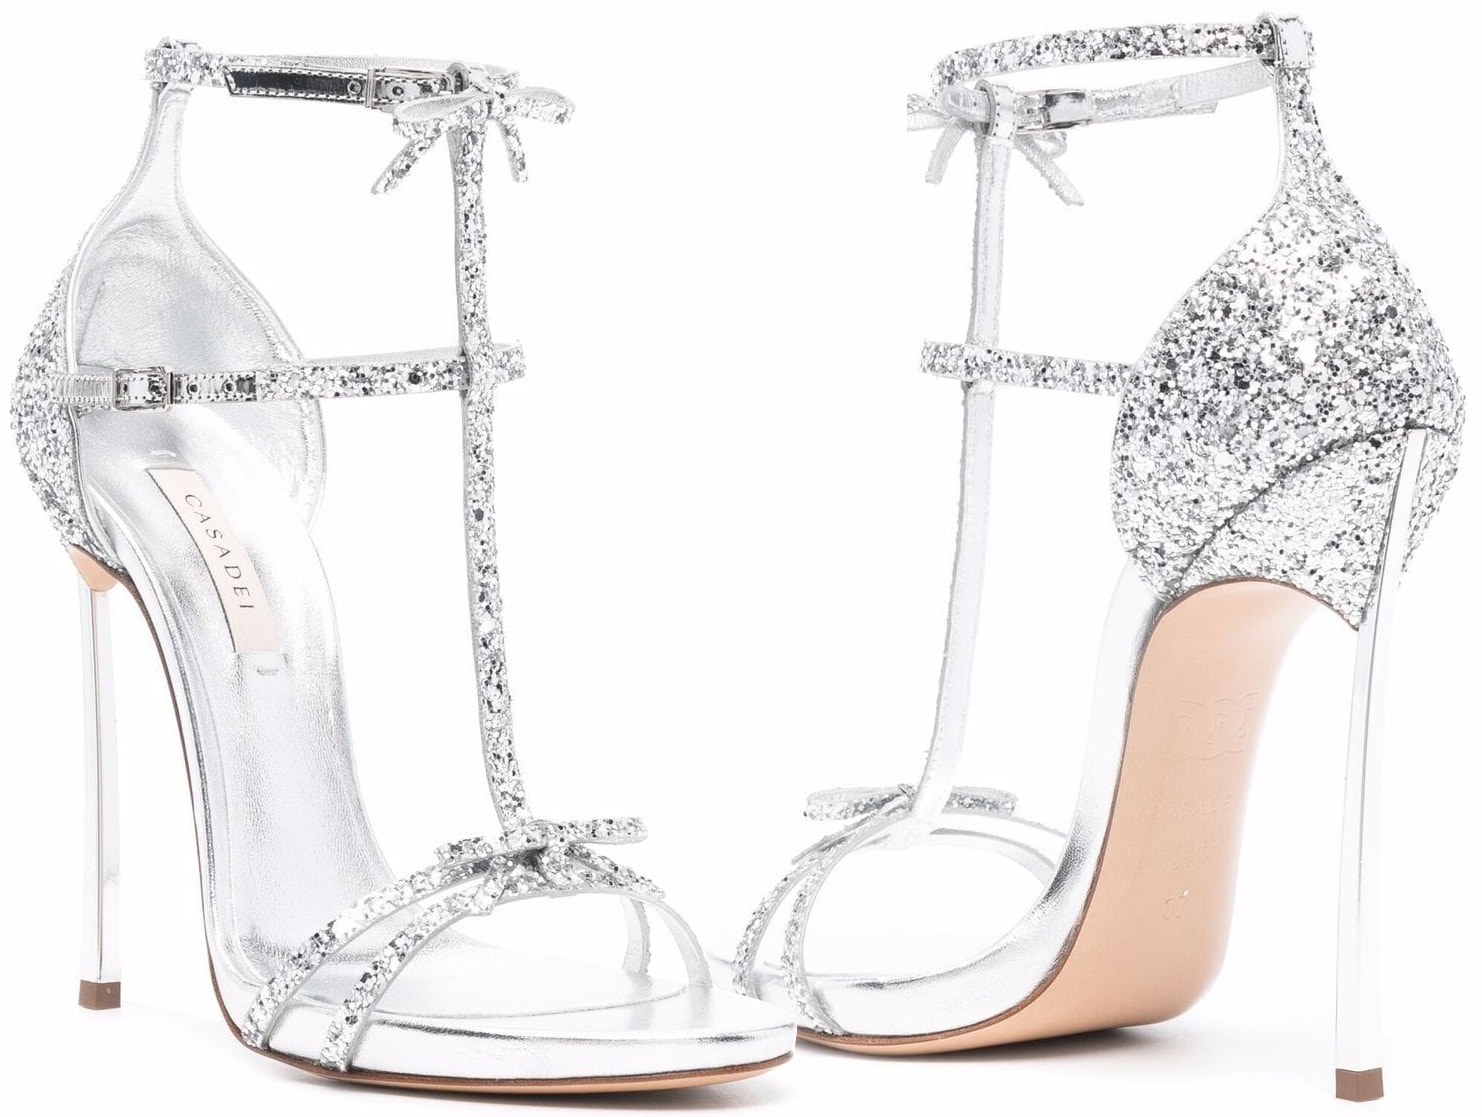 These Casadei sandals feature glittery straps, a bow detail, and the brand's signature Blade heels